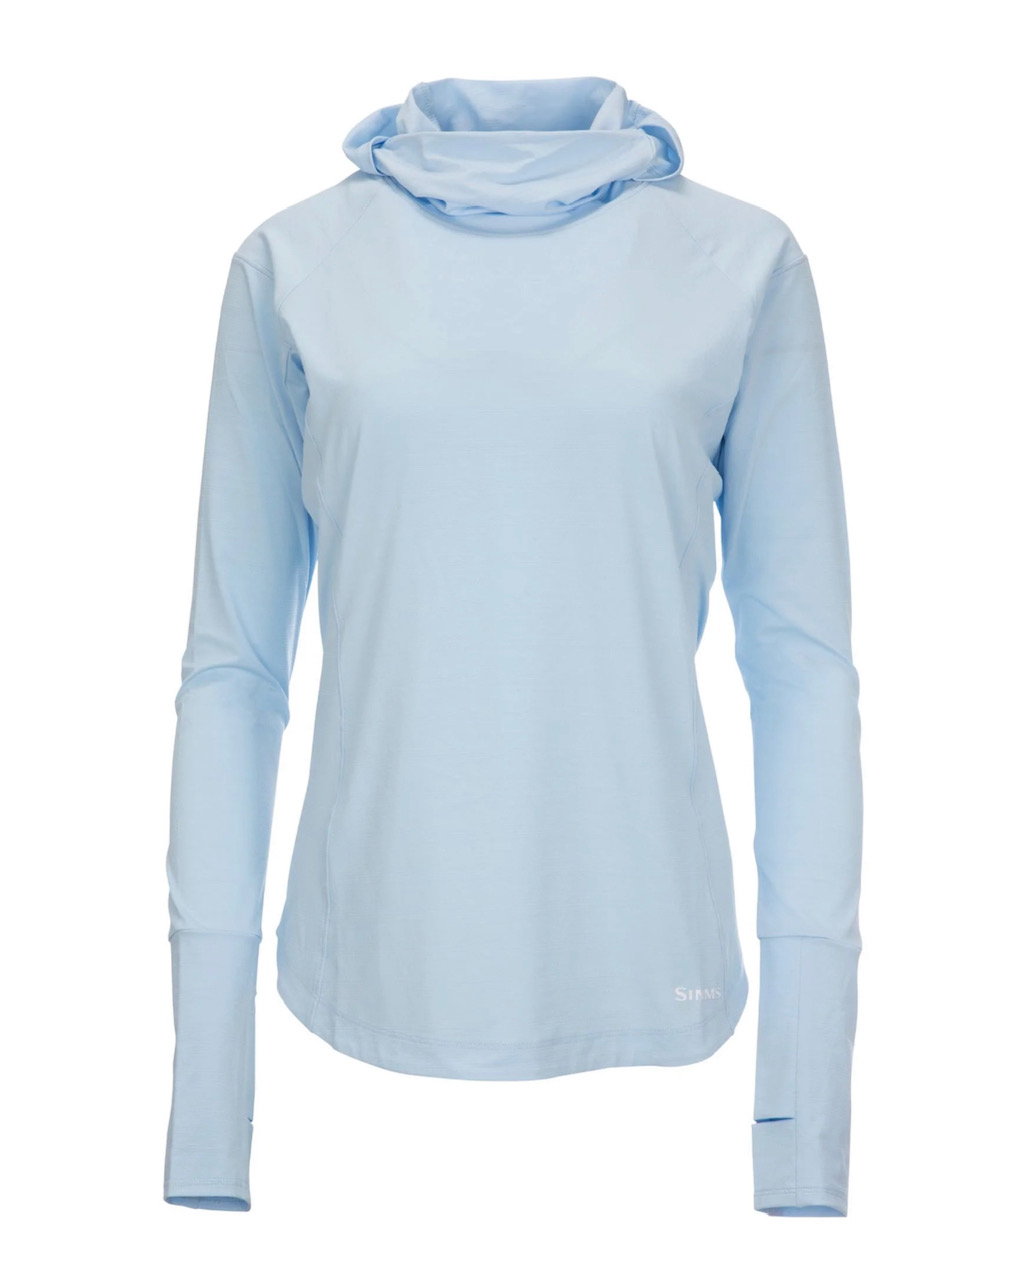 Simms W's Solarflex Cooling Hoody - Ice - Large